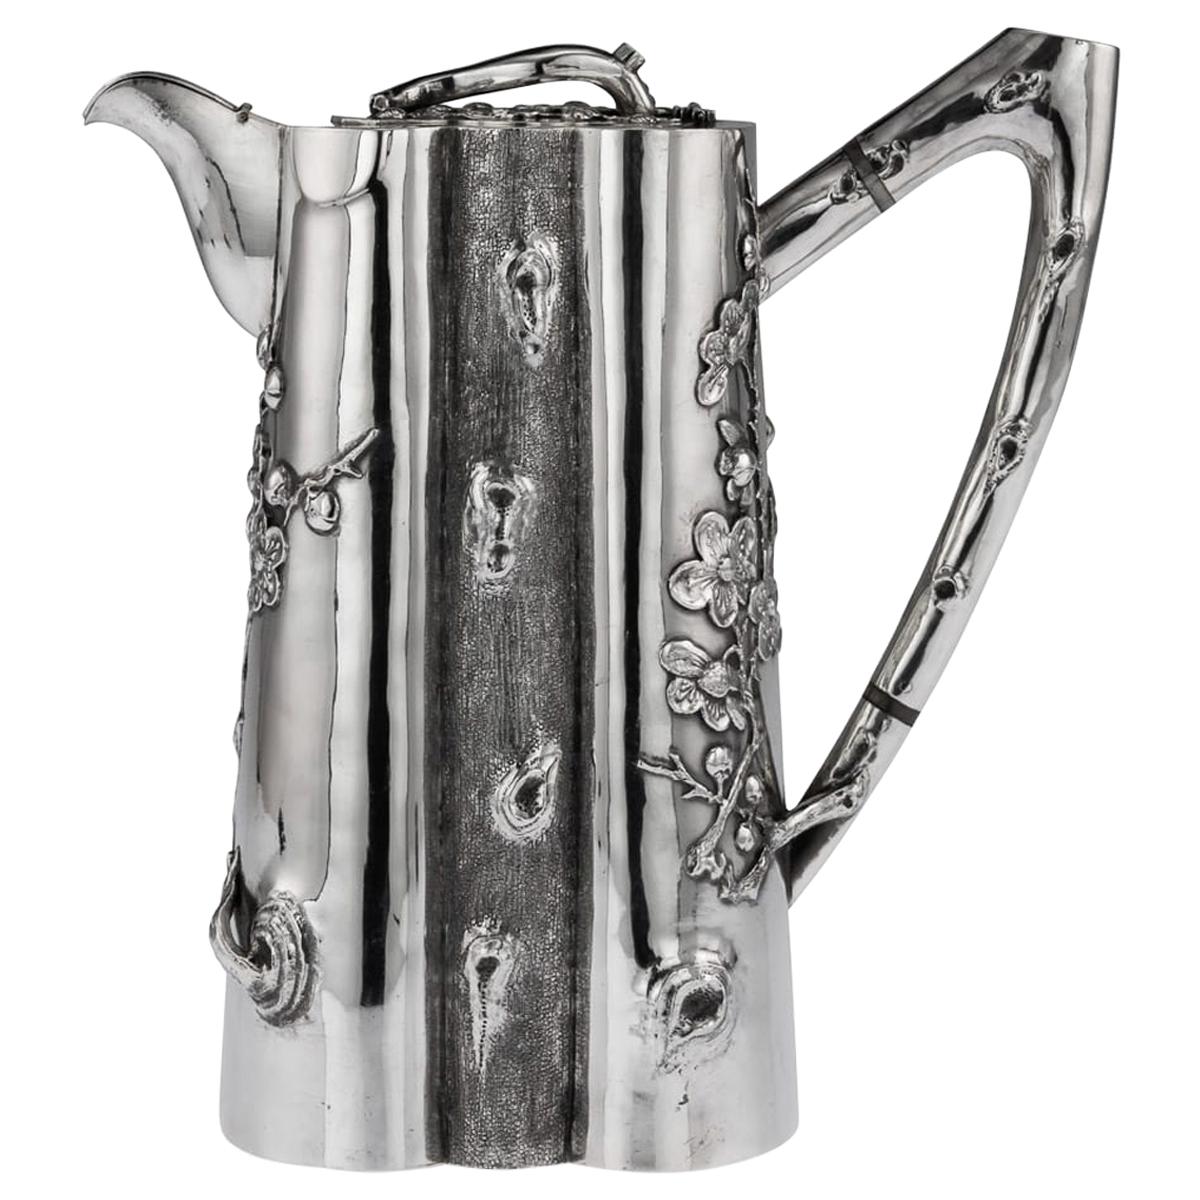 20th Century Chinese Export Solid Silver Hot Water Jug, Houcheong, circa 1900